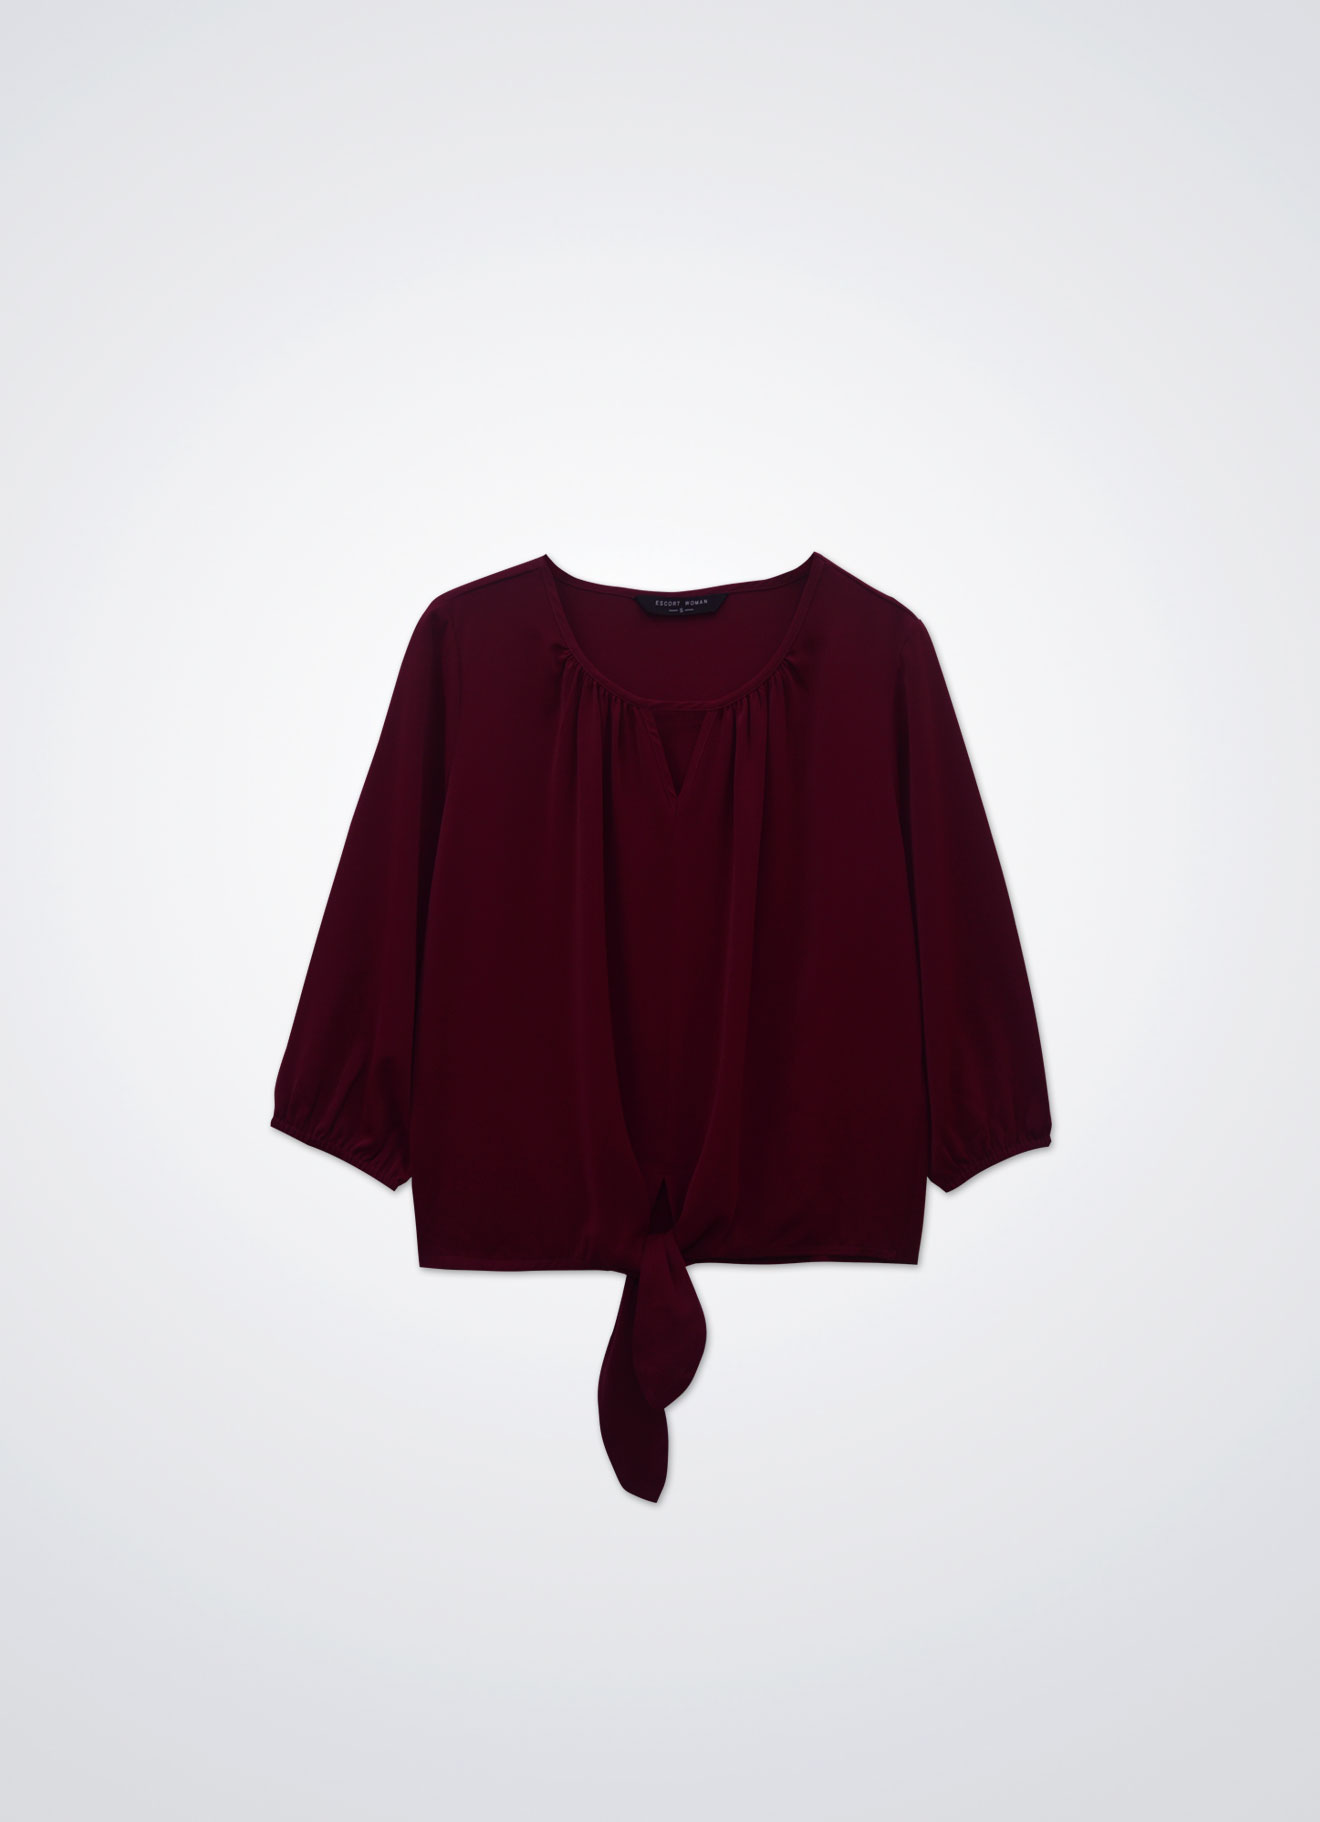 Deep-Claret by Sleeve Top